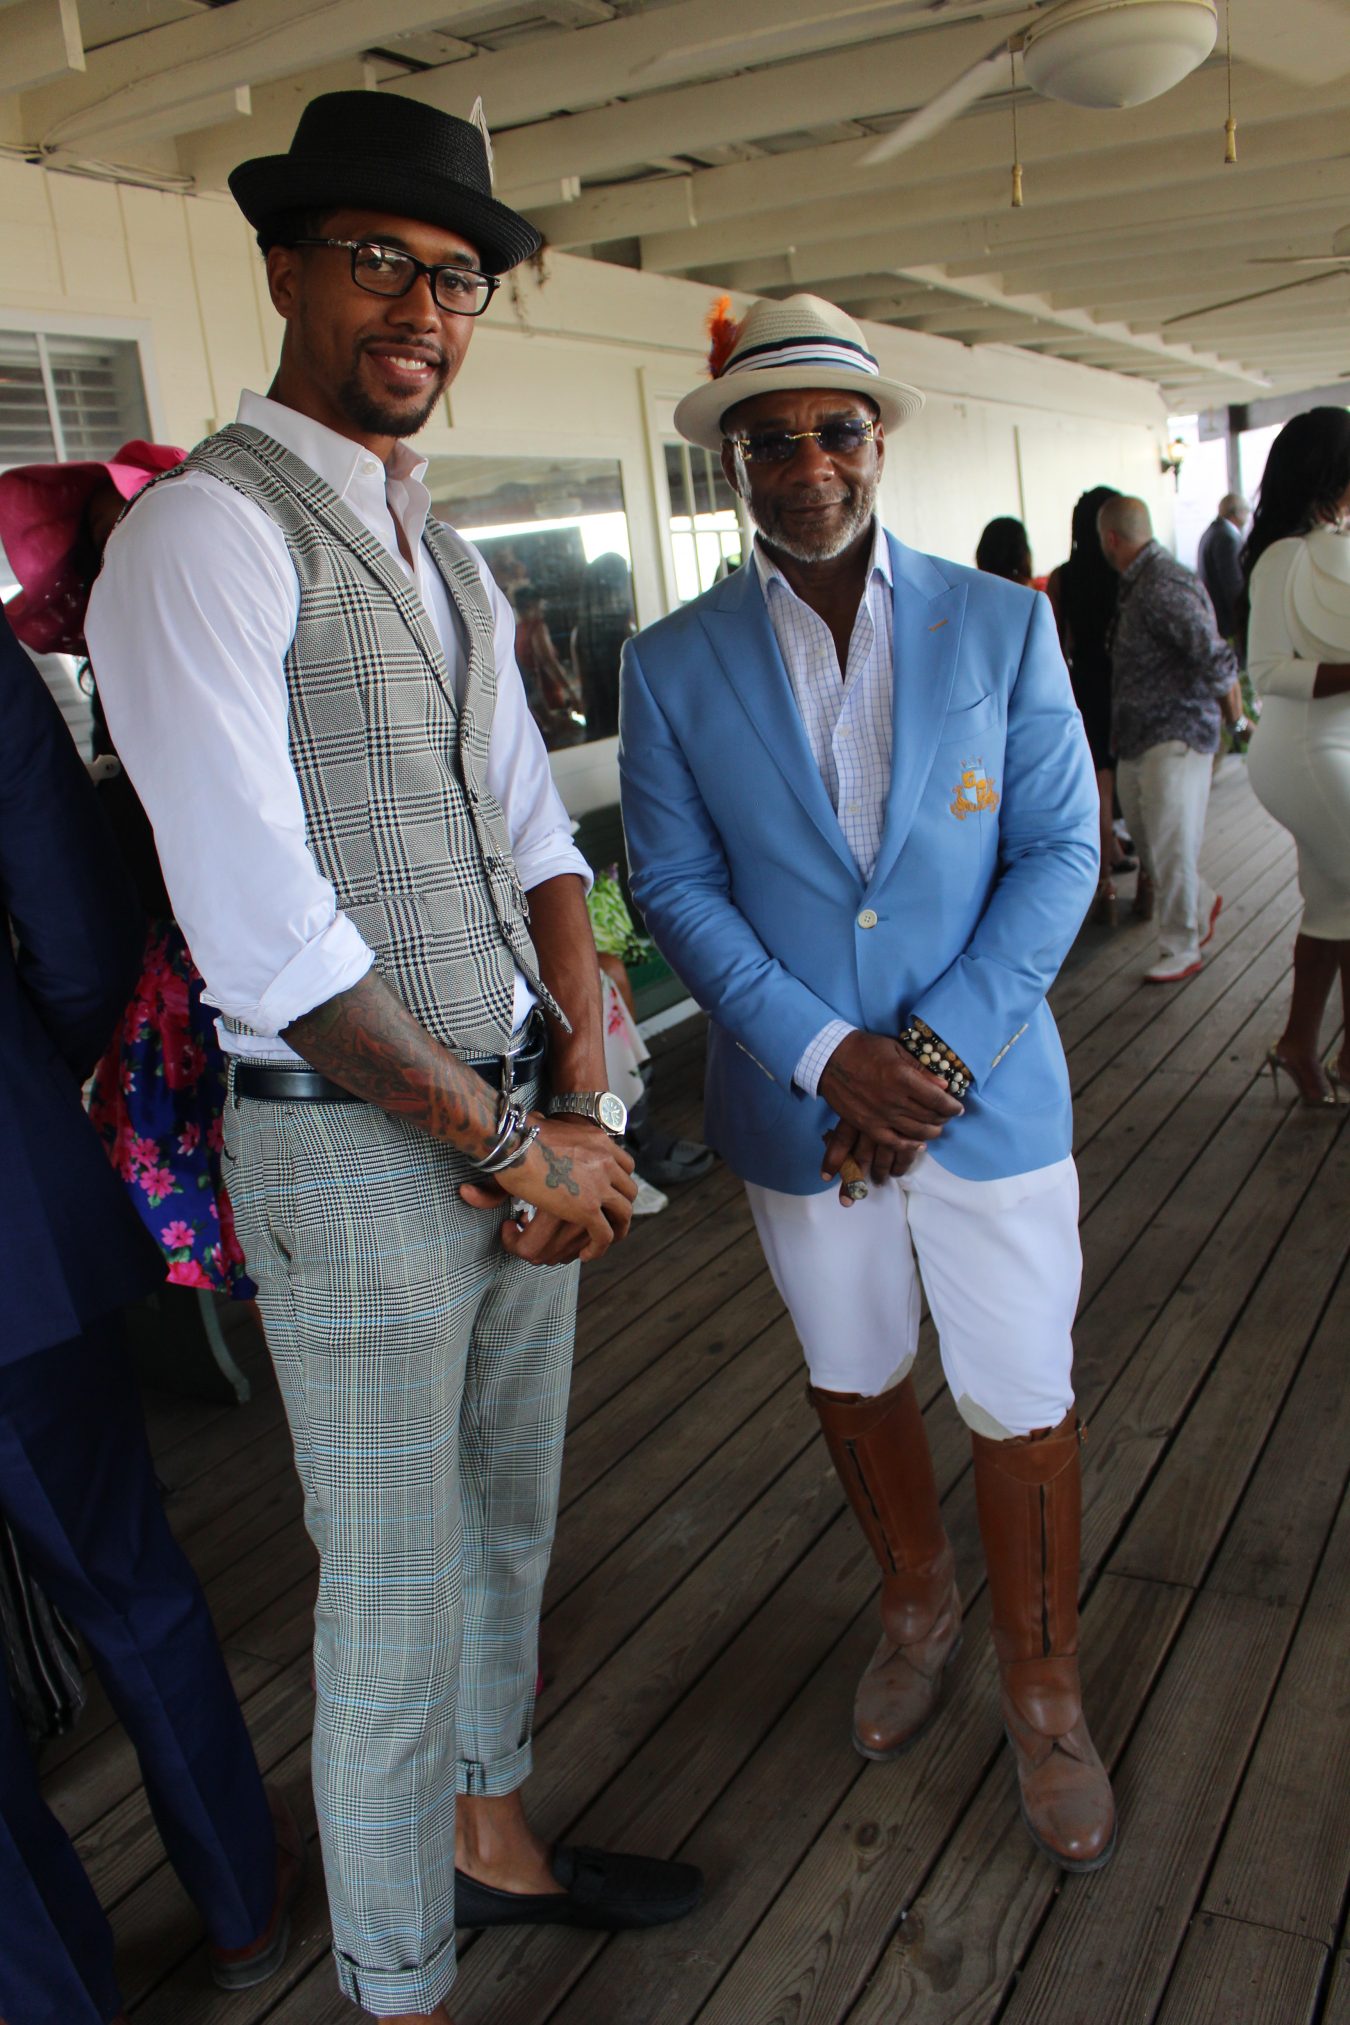 Style highlights from the 2019 Atlanta Fashion and Polo Classic